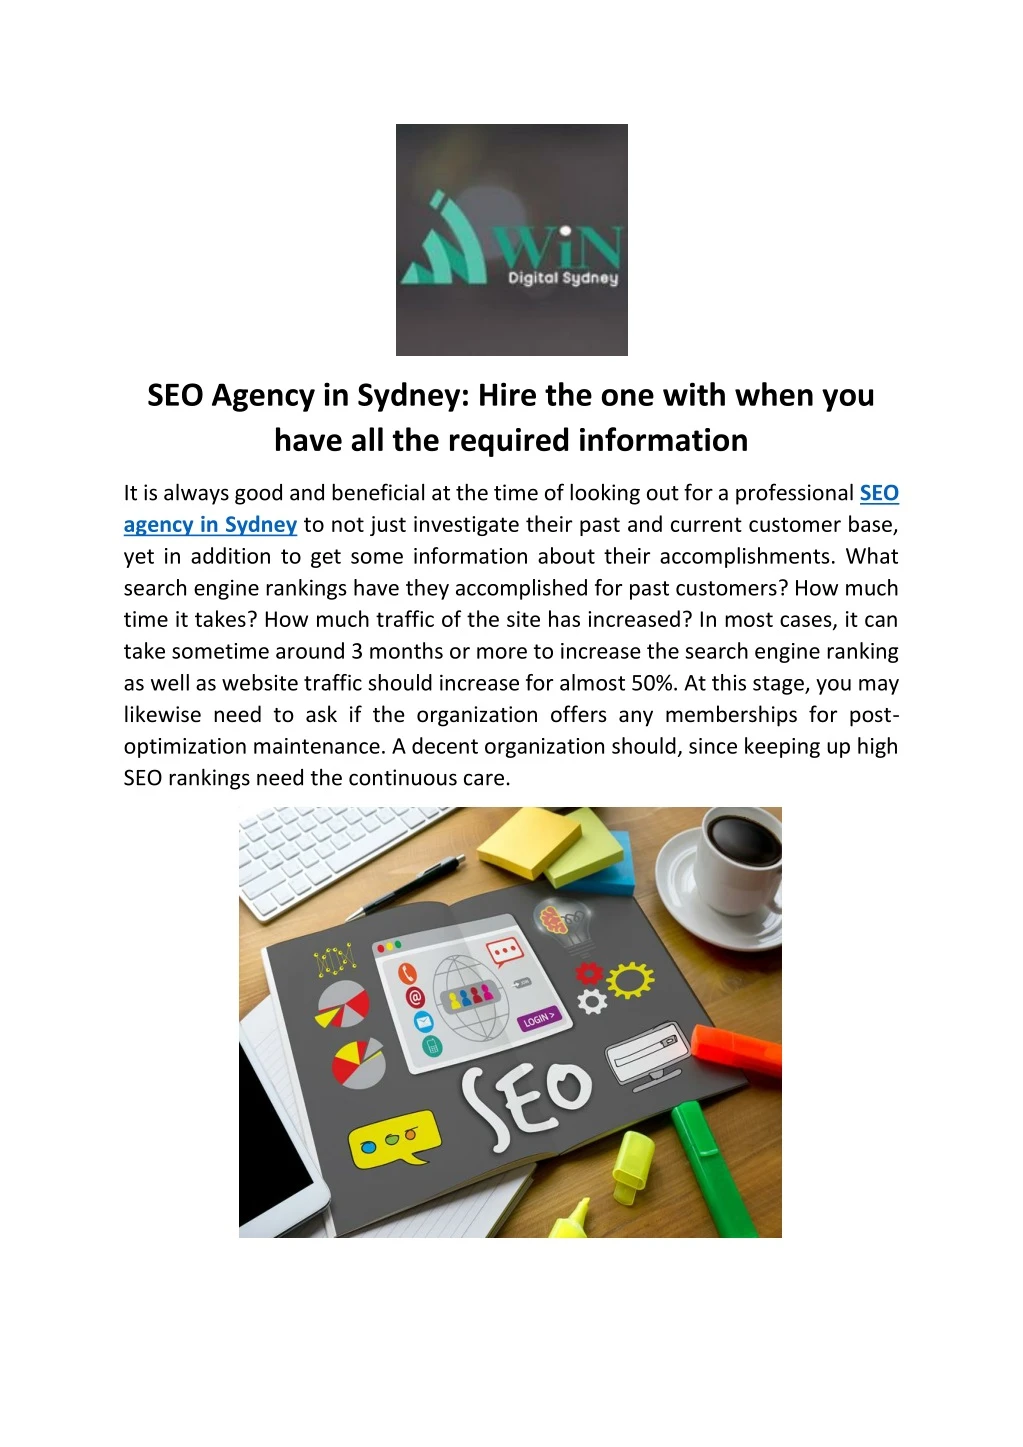 seo agency in sydney hire the one with when